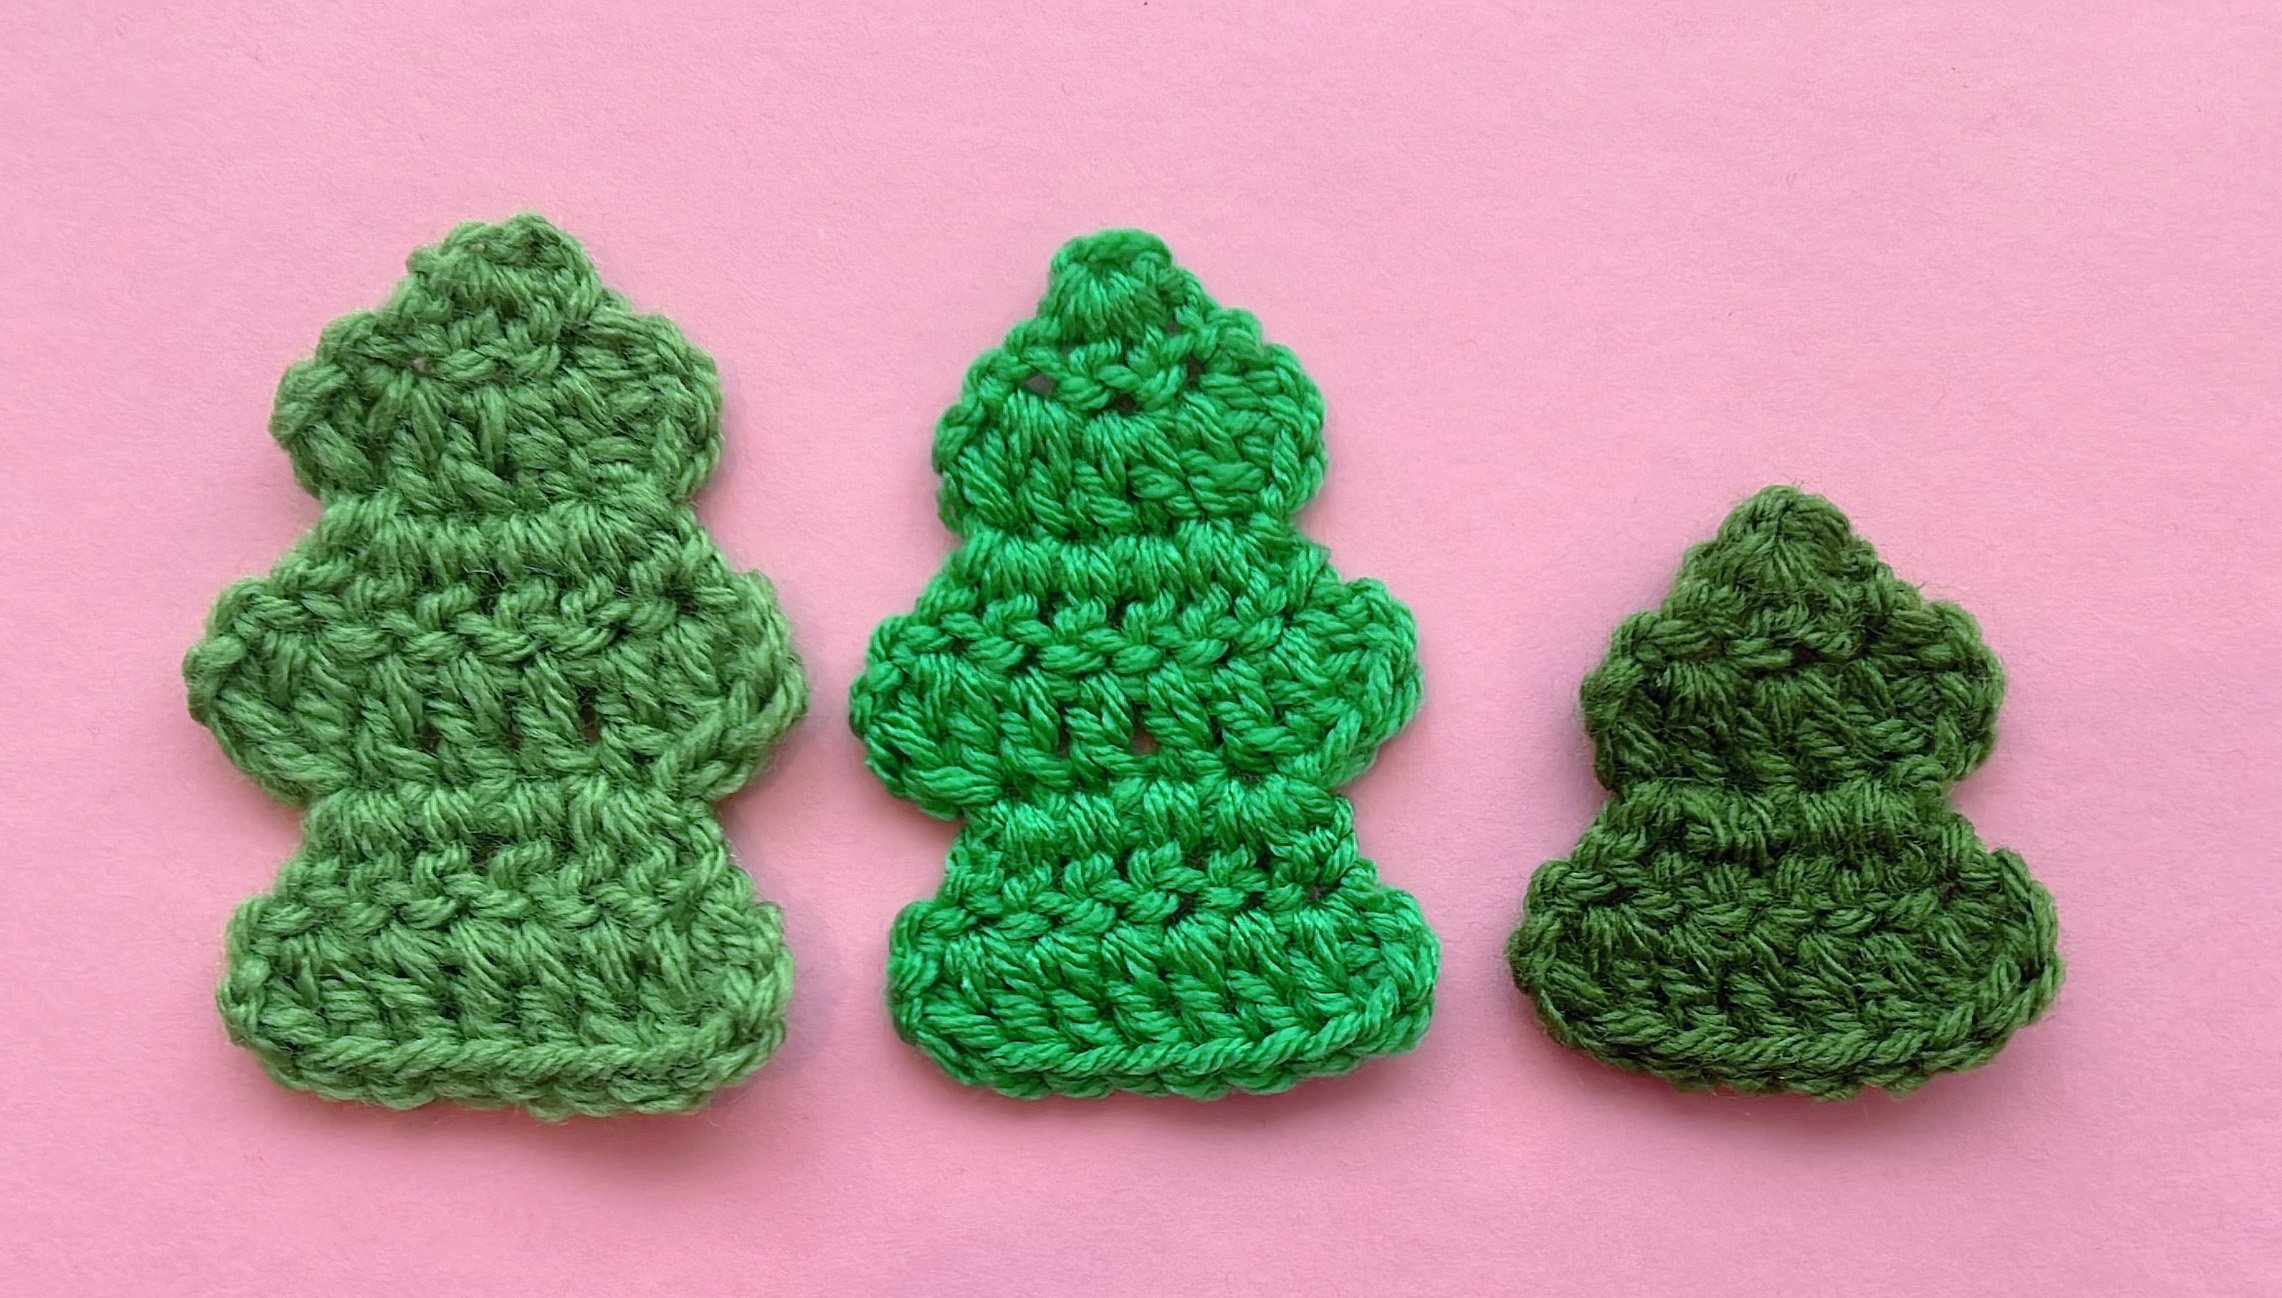 3 small crocheted christmas tree appliqués in different shades of green